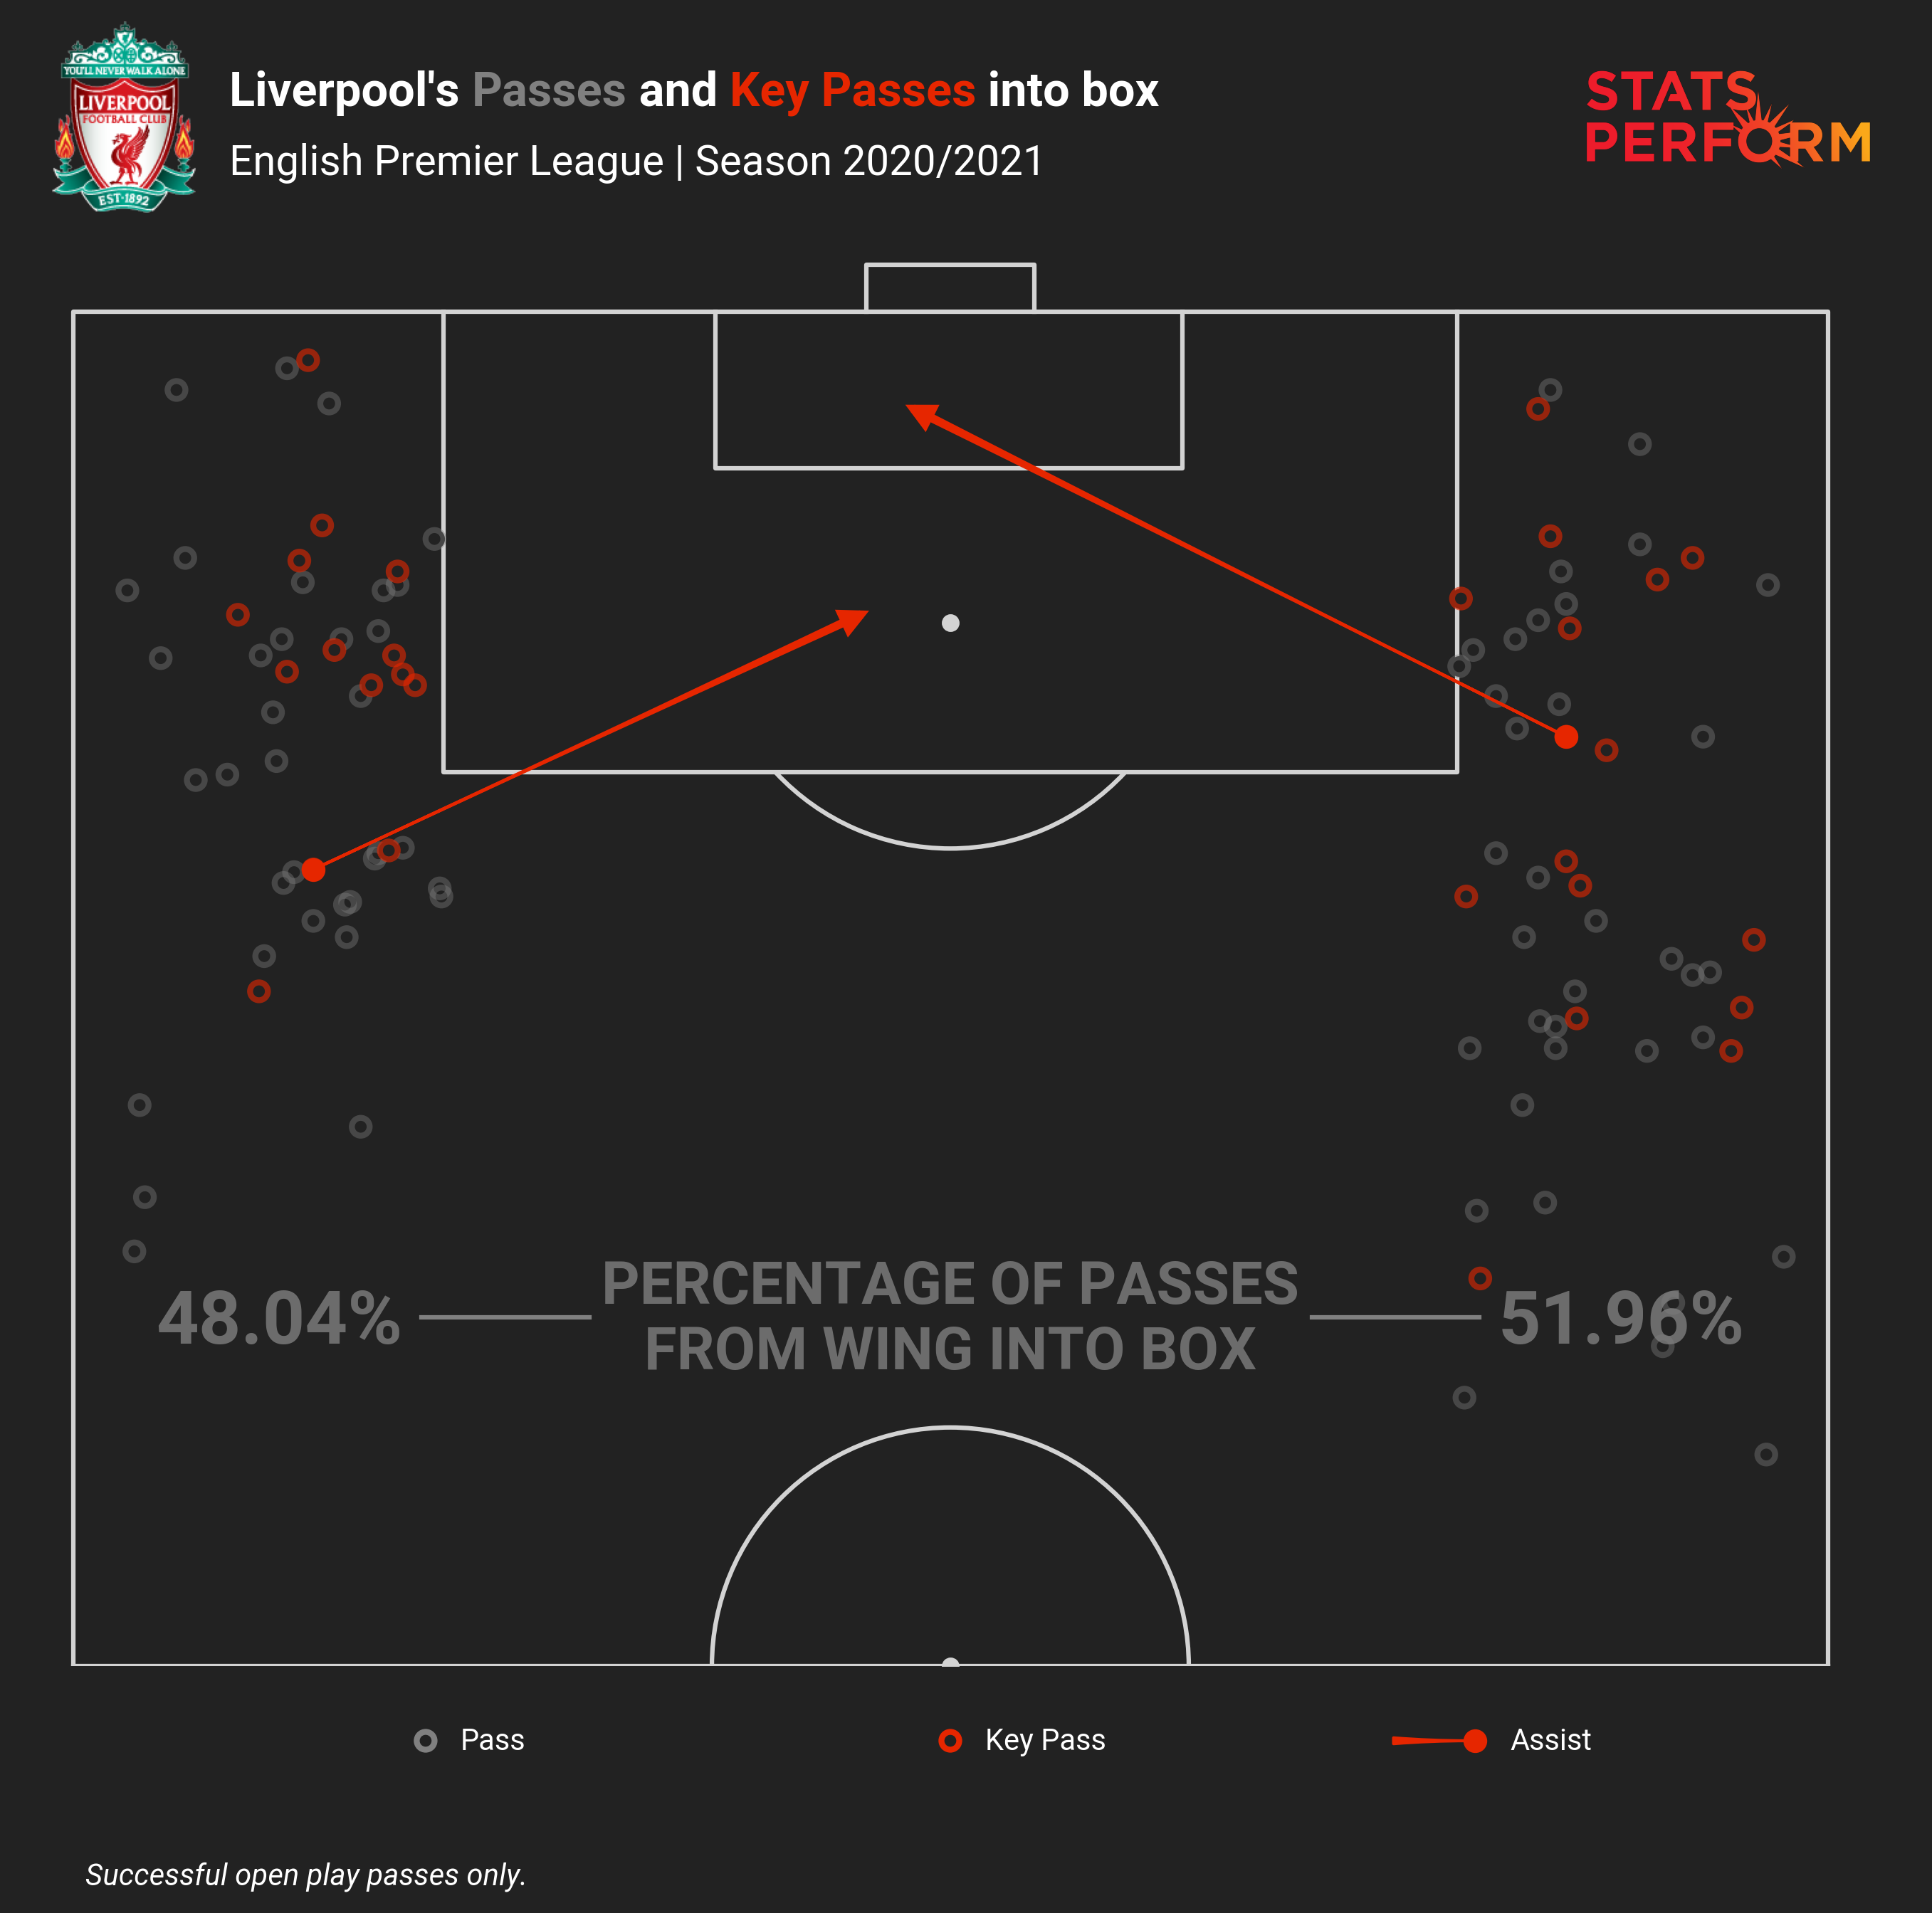 Liverpool have a fairly even balance when it comes to which wing they opt to attack from